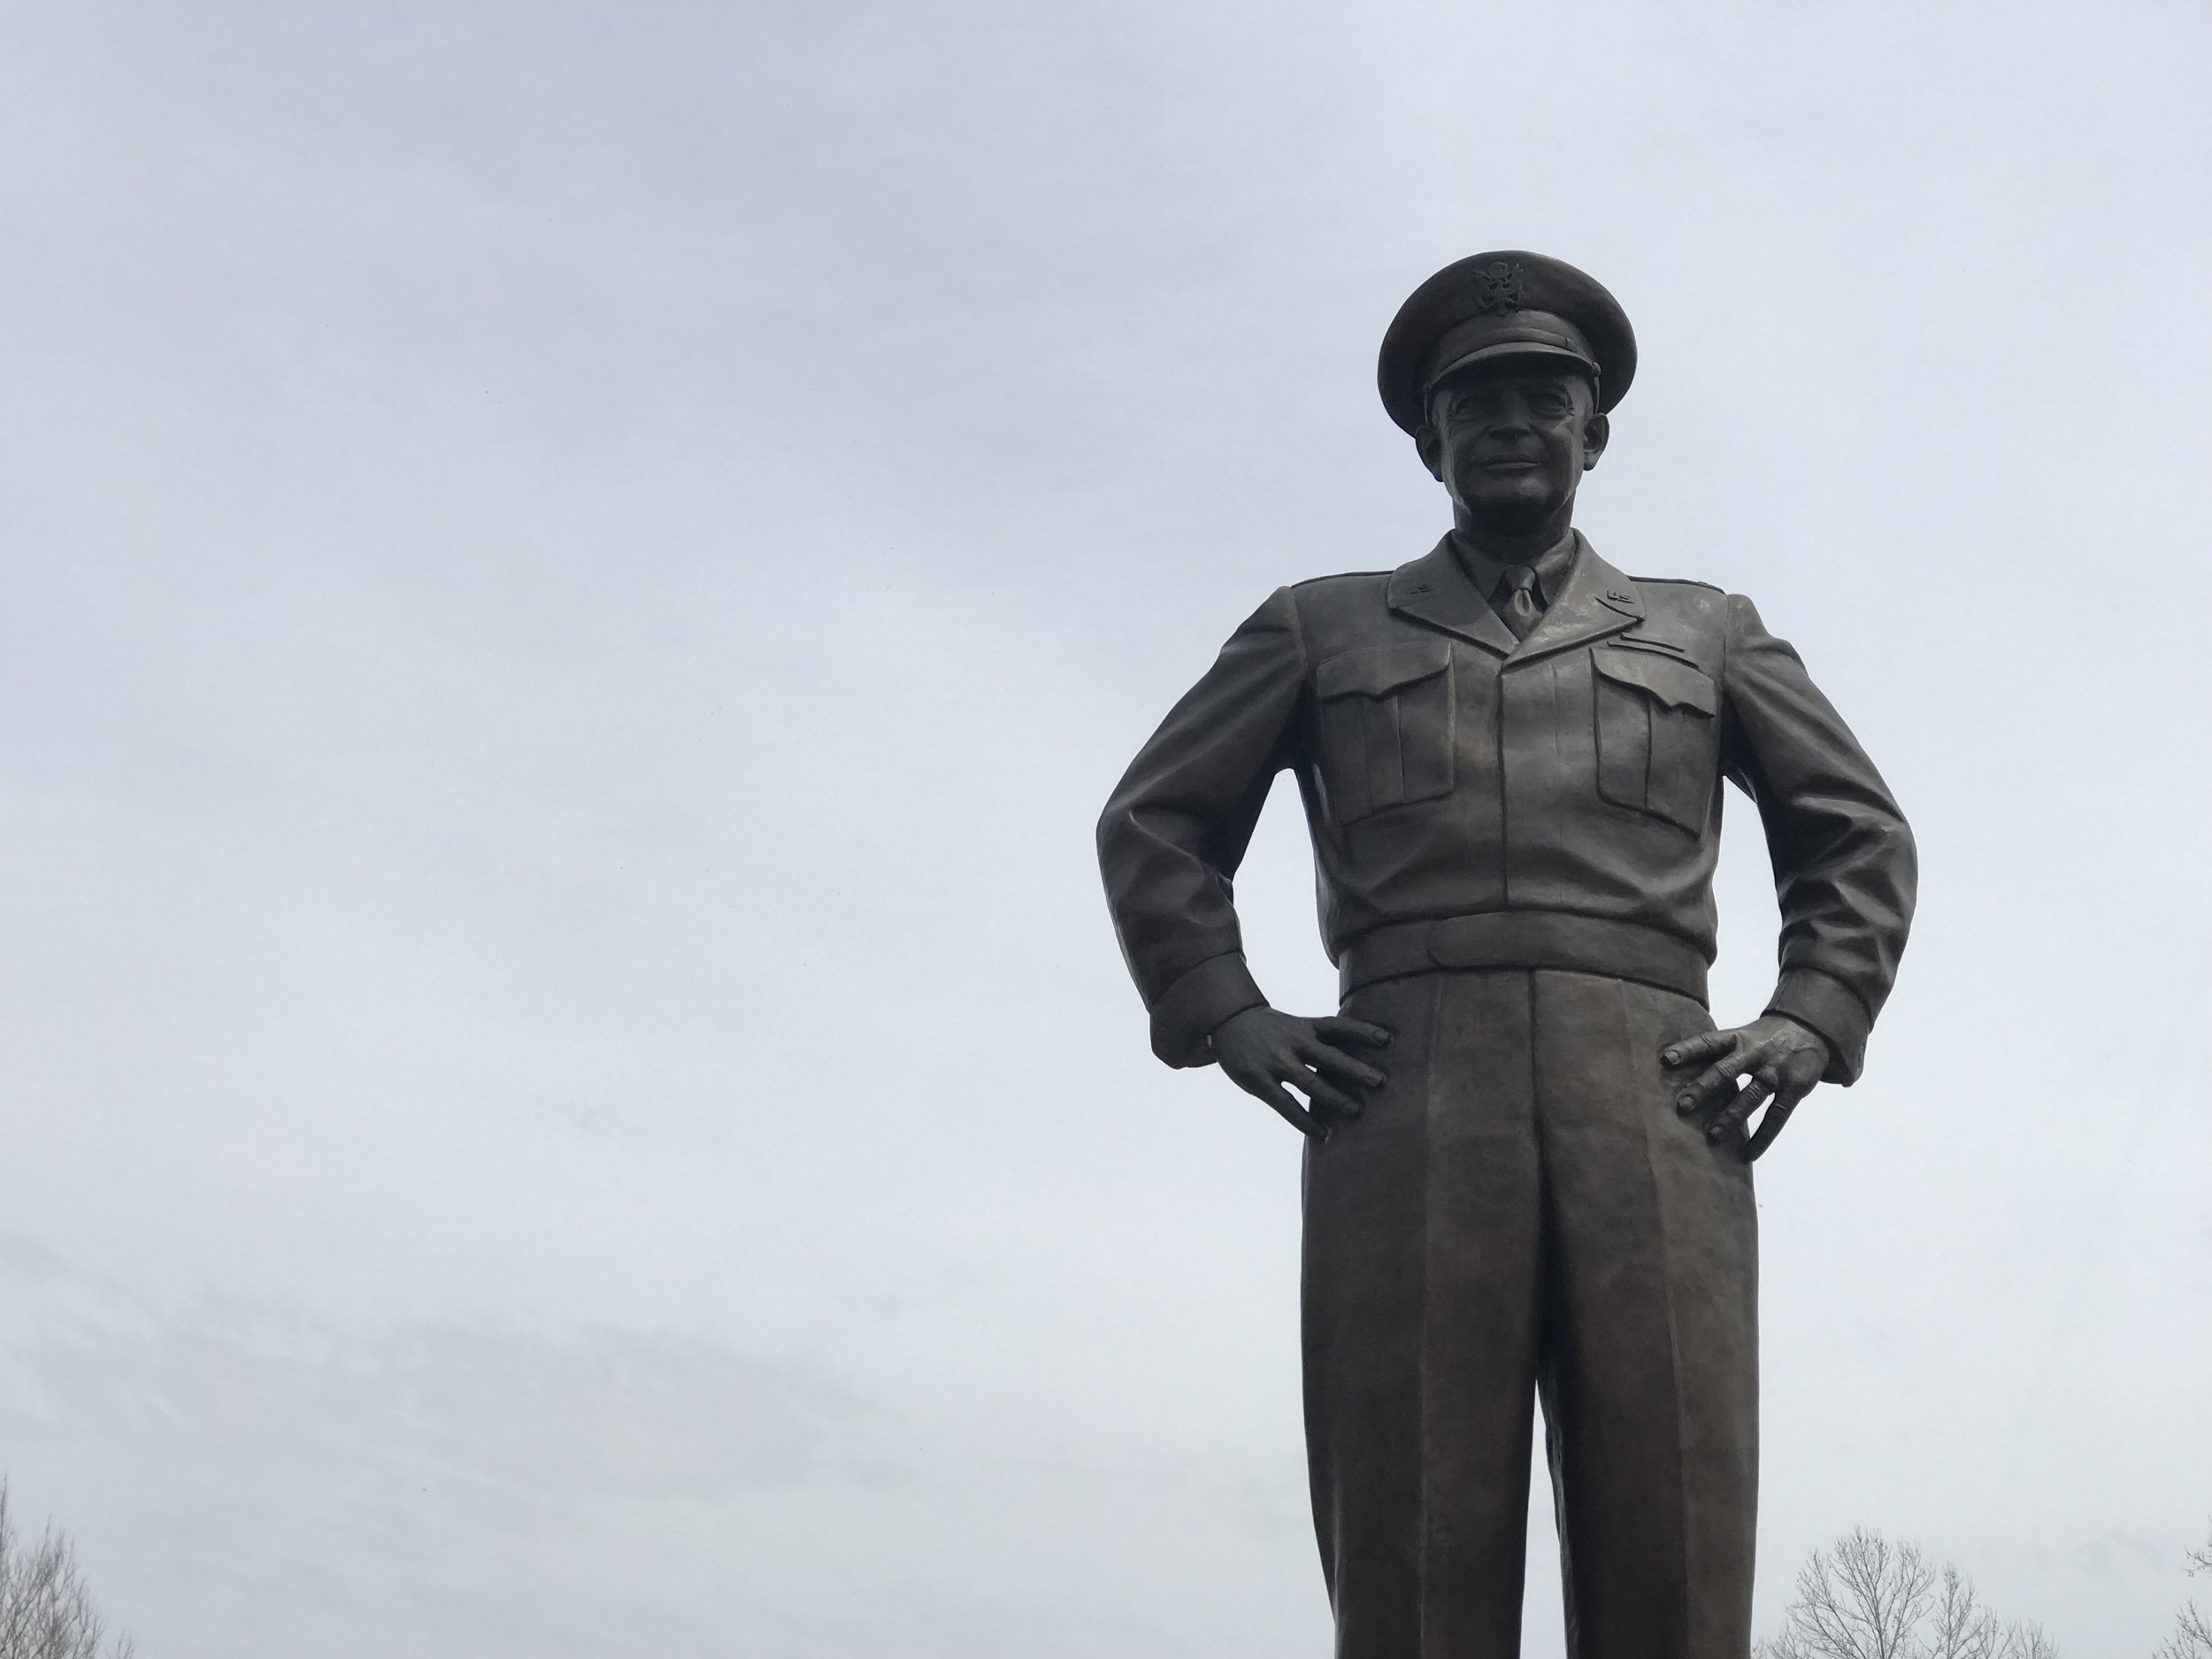  Gen. Dwight D. Eisenhower looms over the plaza at the Eisenhower Presidential Library and Museum in Abilene, Kansas. 